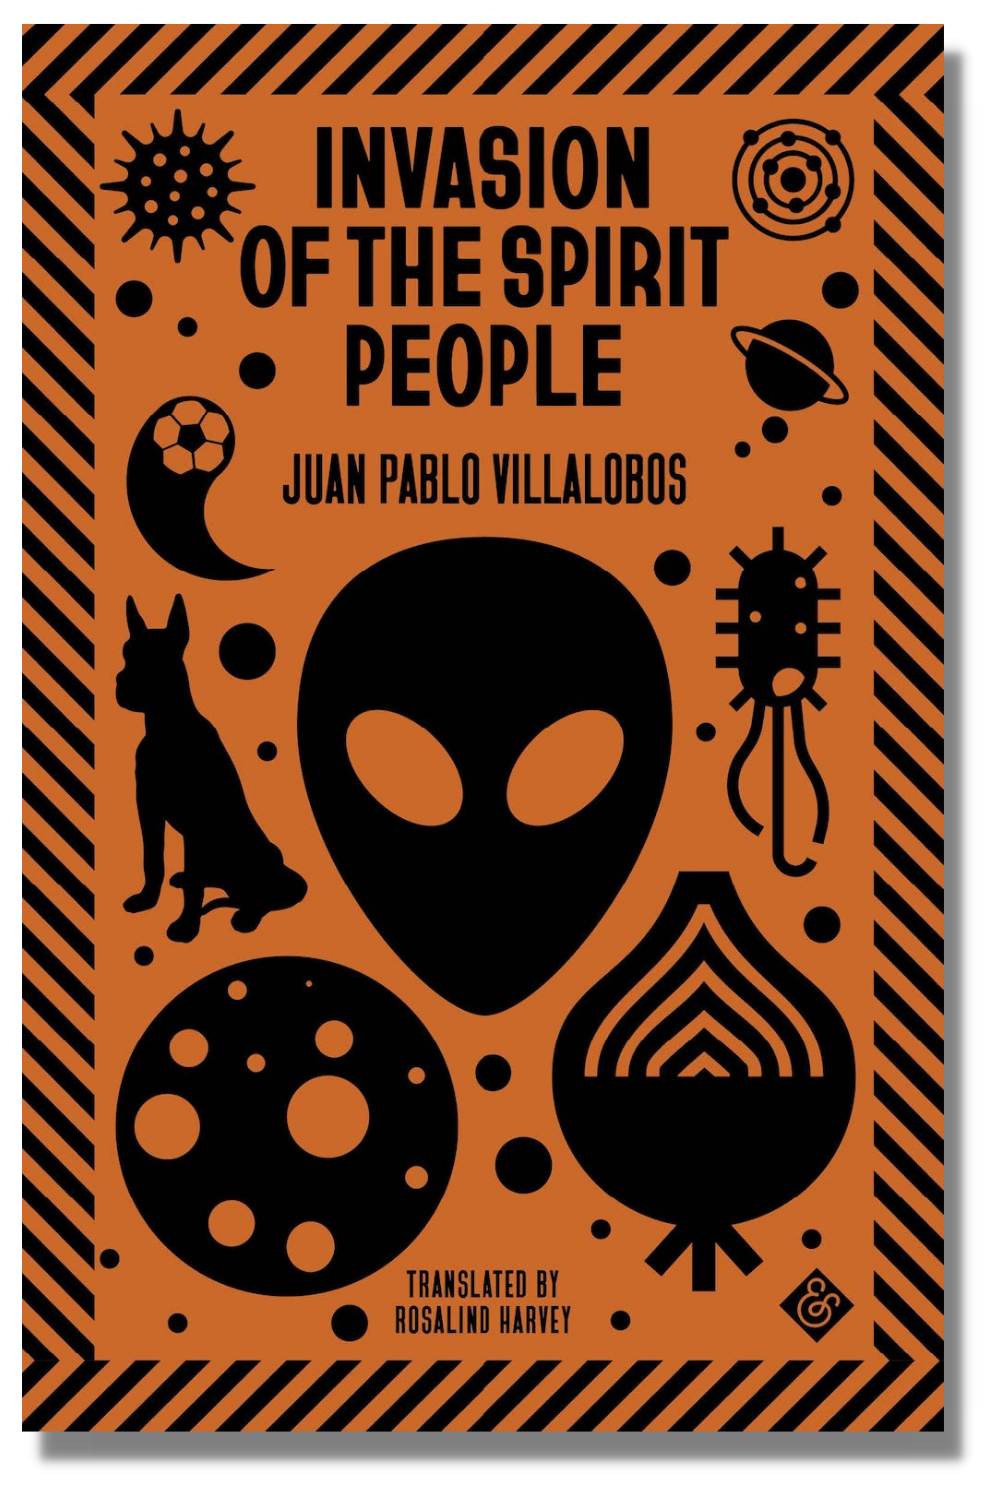 The cover of "Invasion of the Spirit People" by Juan Pablo Villalobos, tr. Rosalind Harvey